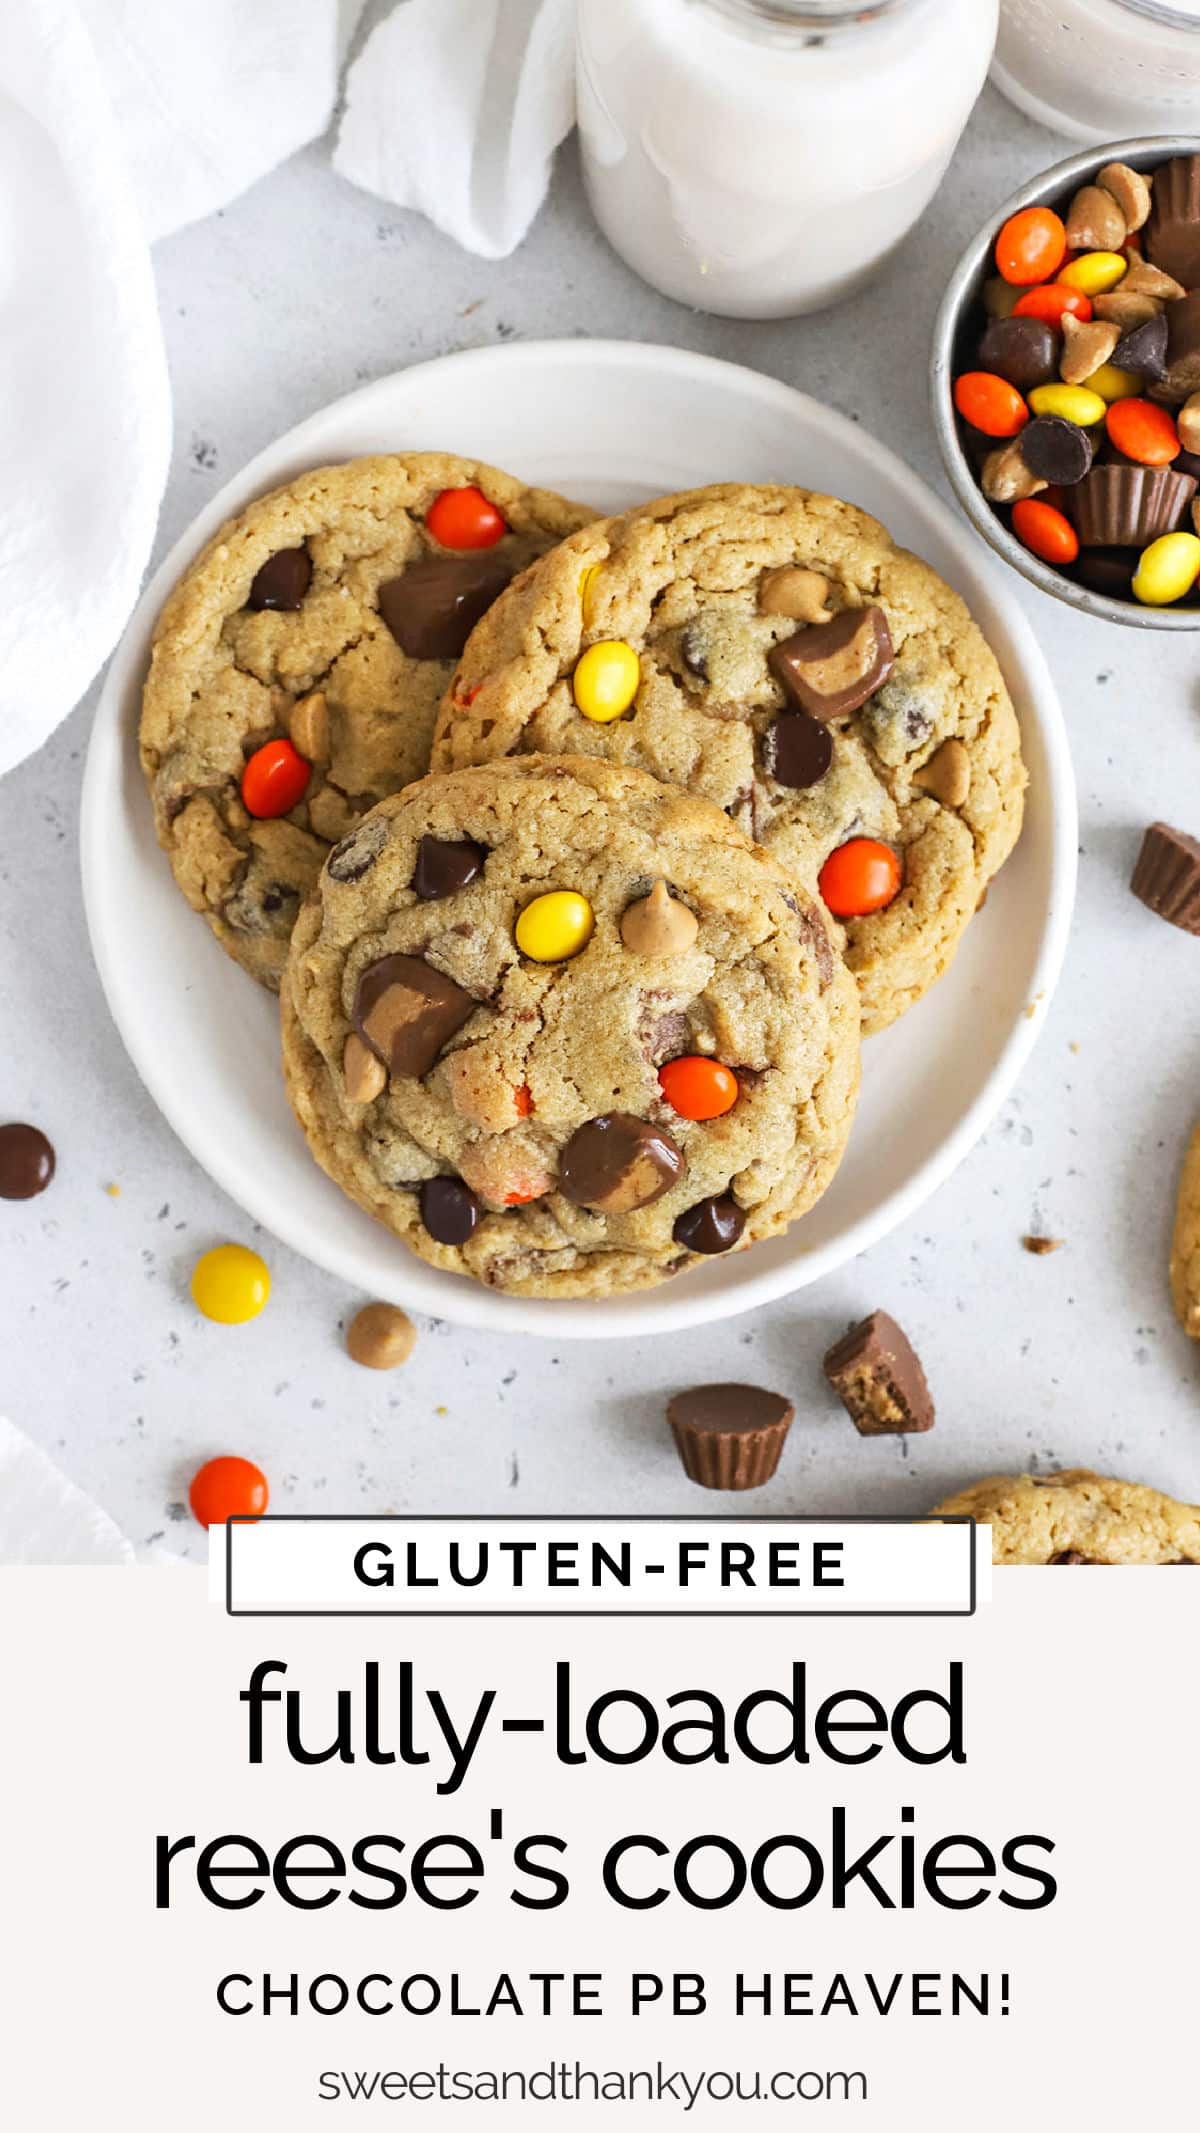 Gluten-Free Reese's Cookies - These gluten-free peanut butter cookies are fully loaded with Reese's cups, Reese's pieces, peanut butter chips AND chocolate chips! The ultimate cookie for peanut butter lovers! / gluten free Reese's peanut butter cookies / gluten-free Reeses peanut butter chocolate chip cookies // gluten-free chocolate peanut butter cookies // gluten-free Reese's pieces cookies /